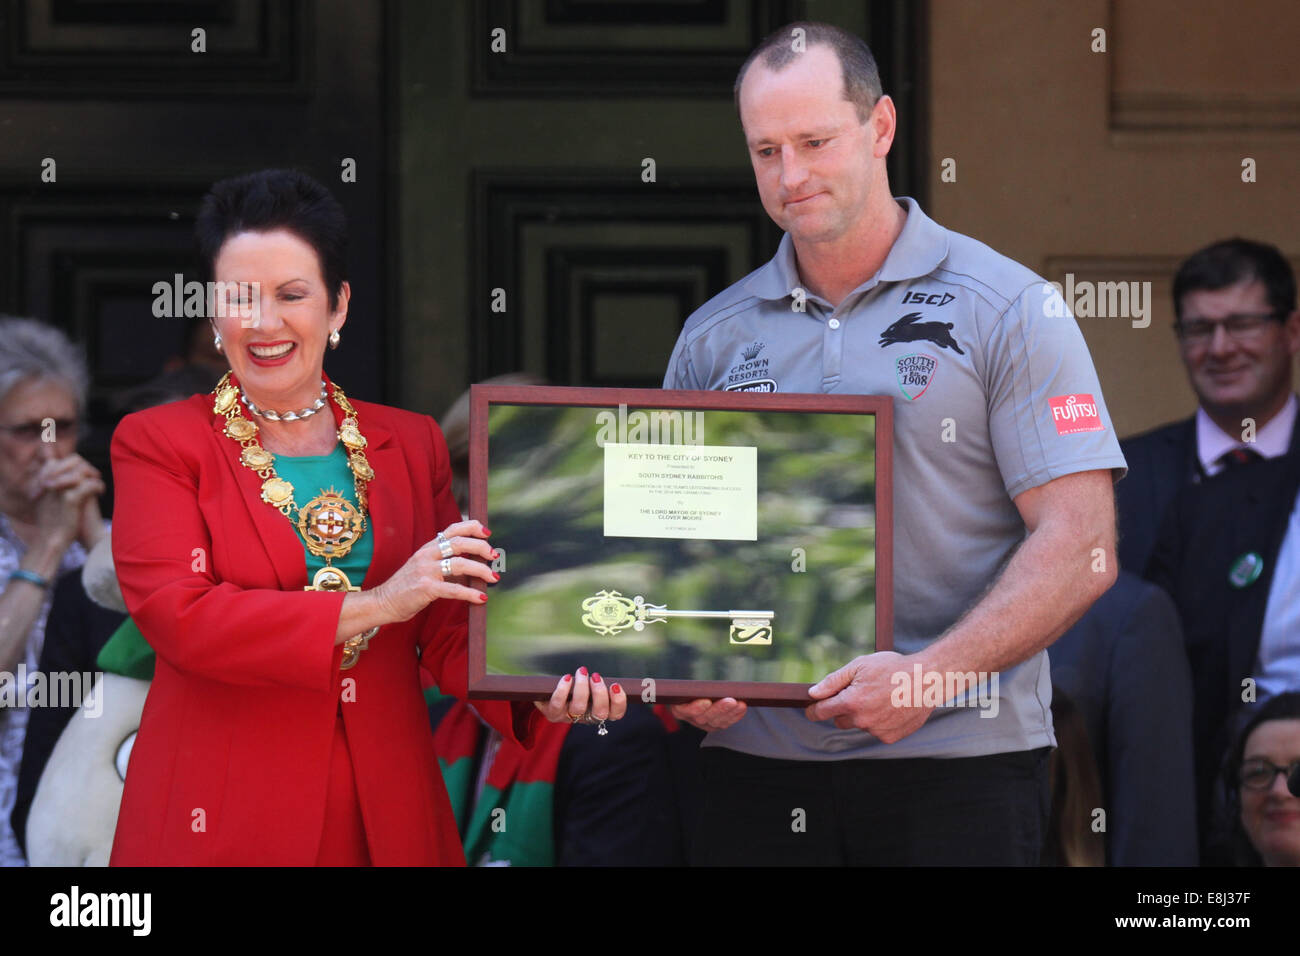 Sydney, NSW, Australia. 9th October 2014. After winning the NRL Grand Final, the South Sydney Rabbitohs were given the keys to the City of Sydney by the Lord Mayor at a ceremony in Sydney Square watched by fans of the rugby team. Pictured: Lord Mayor of Sydney Clover Moore presents South Sydney Rabbitohs Coach Michael Maguire with the keys to the City of Sydney, after the team won the NRL Grand Final. Copyright Credit:  2014 Richard Milnes/Alamy Live News. Stock Photo